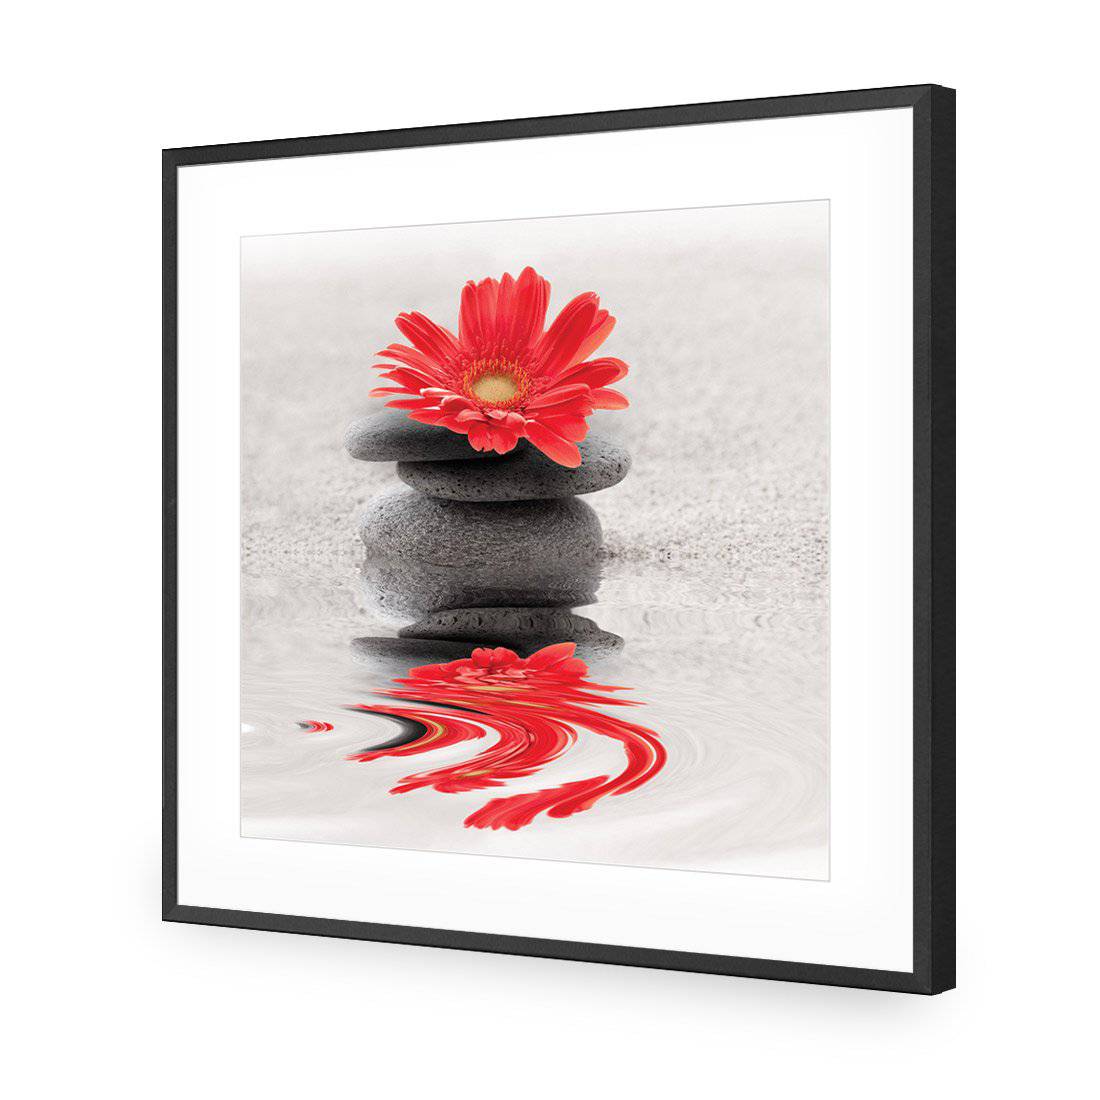 Red Flower Reflection, Square-Acrylic-Wall Art Design-With Border-Acrylic - Black Frame-37x37cm-Wall Art Designs